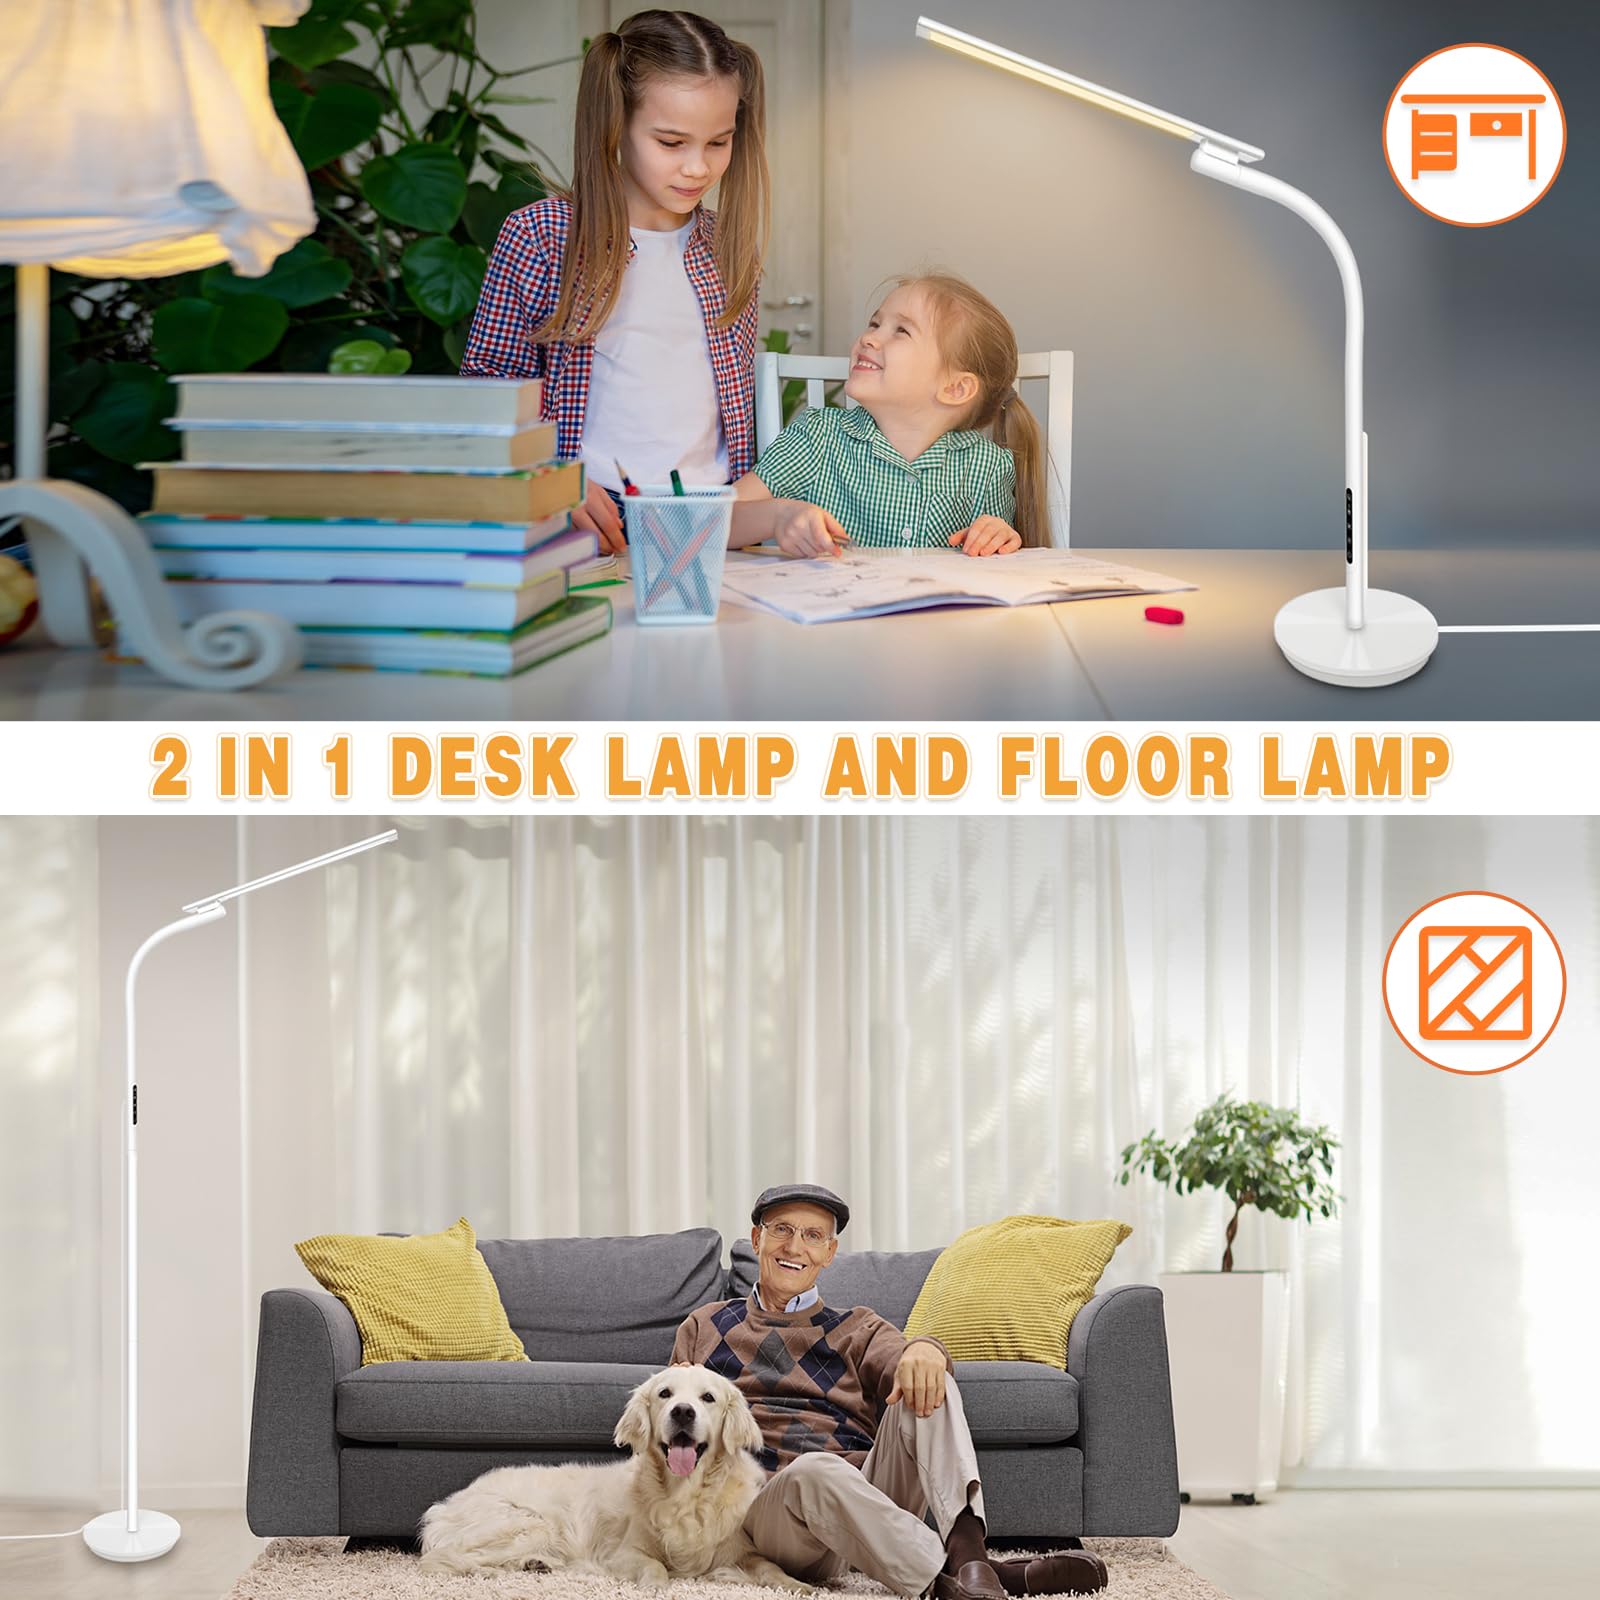 Fistone LED Floor Lamp, Floor Lamps with Stepless Adjustable 3000K-6000K Colors & Brightness, Remote & Touch Control Reading Floor Lamps, Adjustable Gooseneck Standing Floor Lamp for Bedroom Office